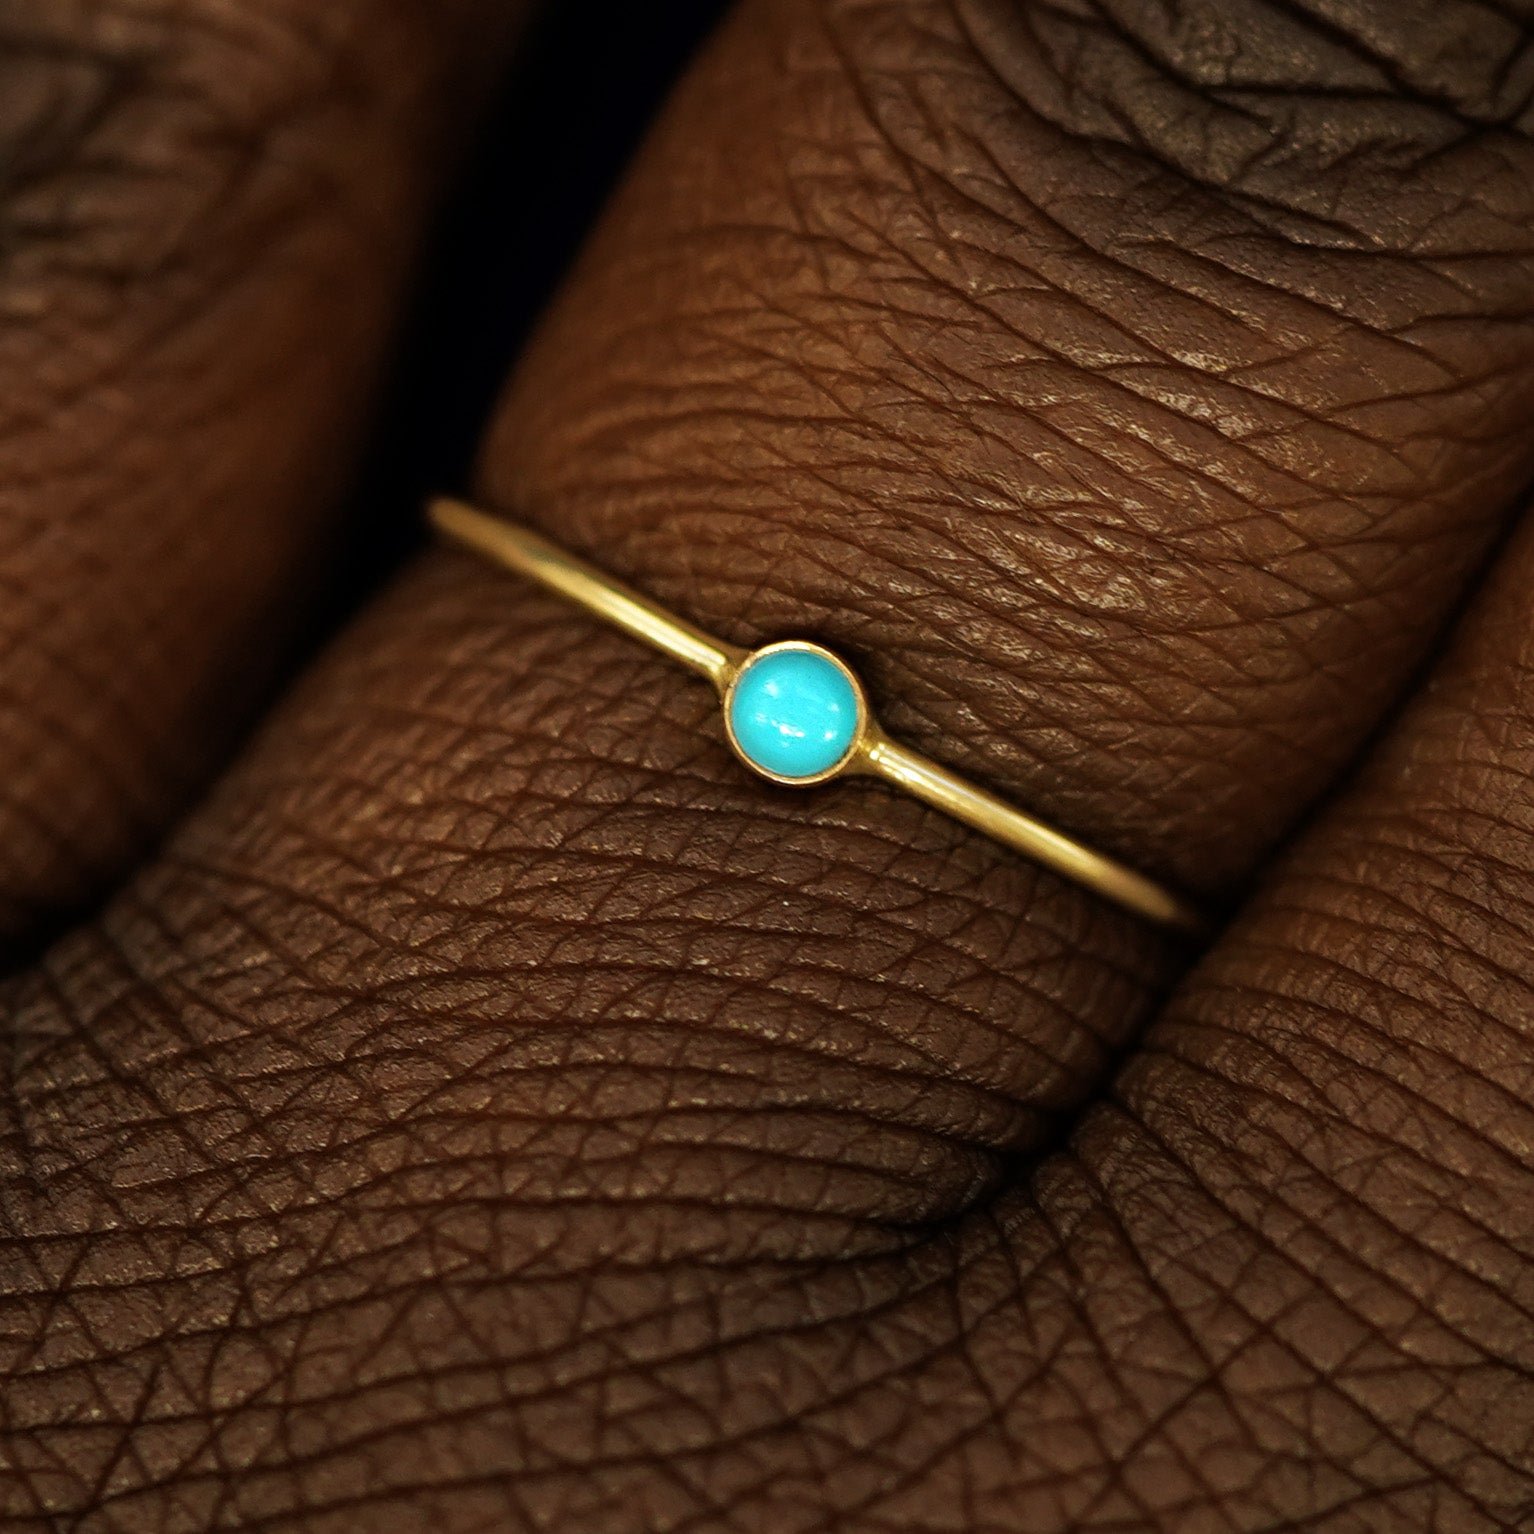 Close up view of a model's fingers wearing a 14k yellow gold Turquoise Ring